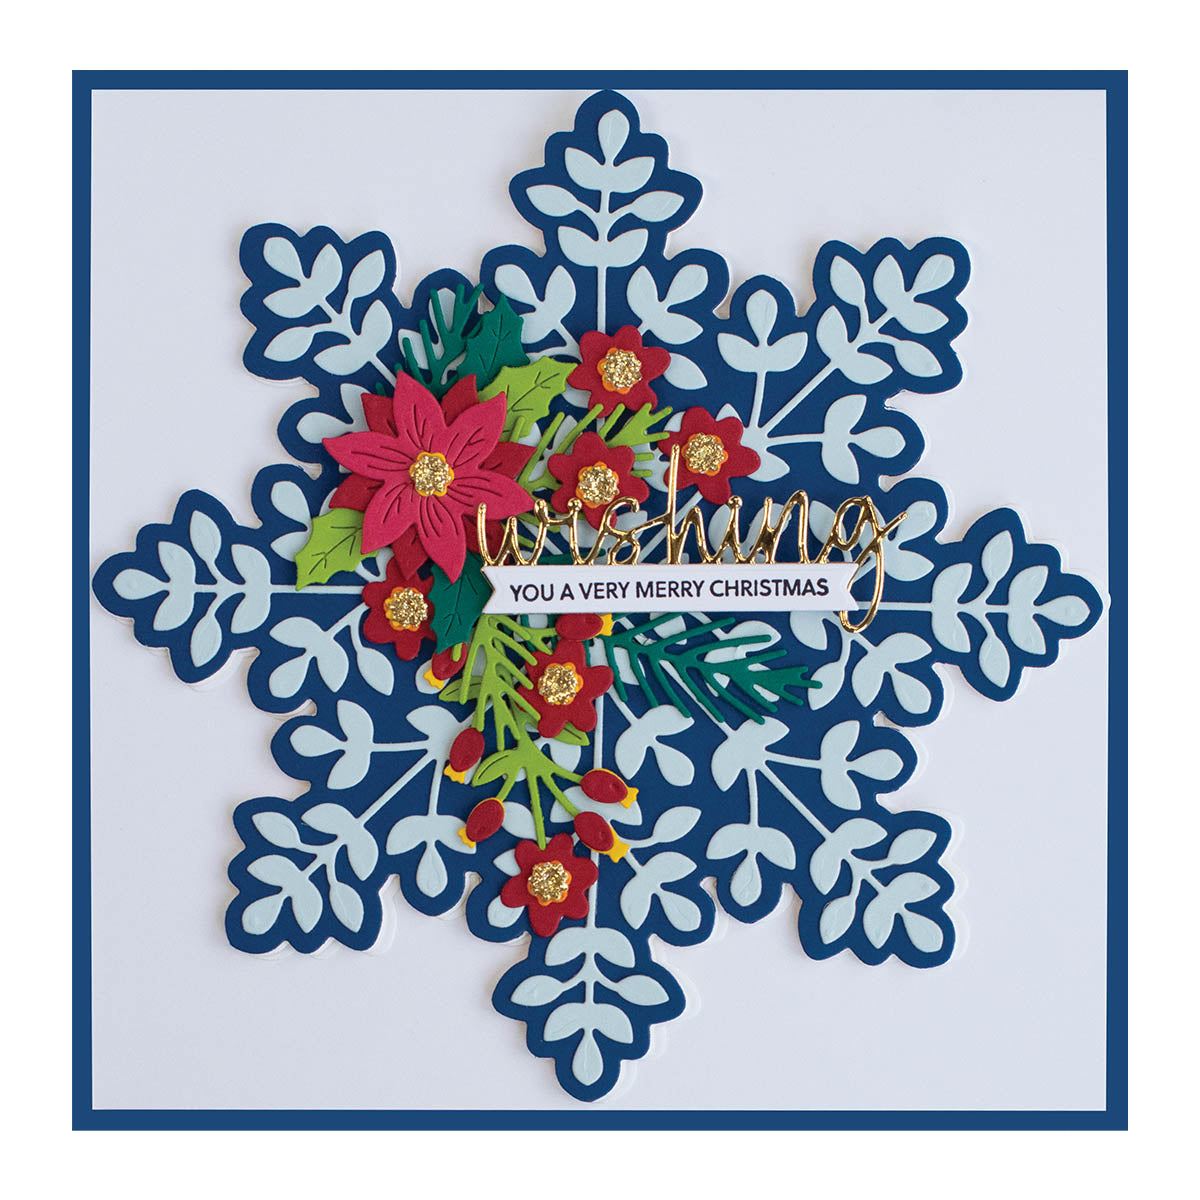 Snowflake Card Creator Etched Dies from the Bibi's Snowflakes Collection by Bibi Cameron